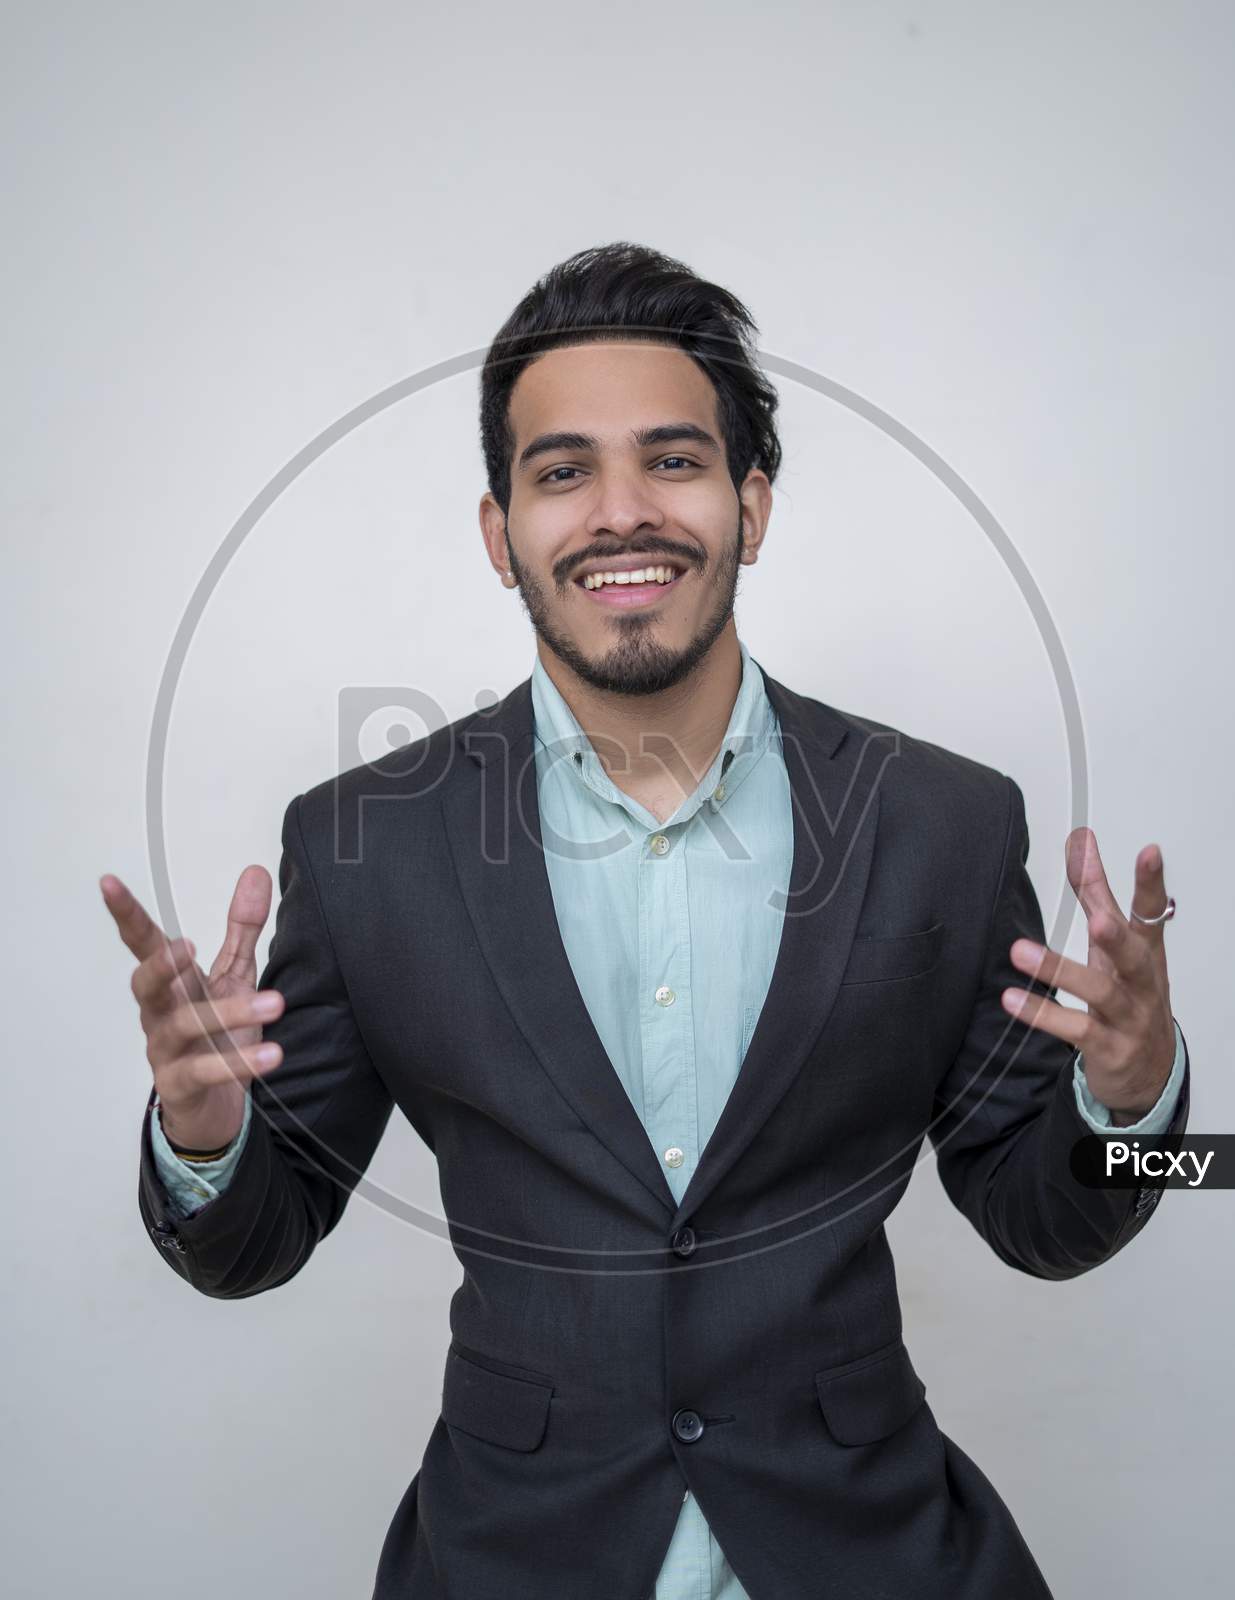 Image Of Handsome Young Man In Suit Smiling Keeping Arms Outstretched And Looking At Camera While Standing Against White Background Ps Picxy